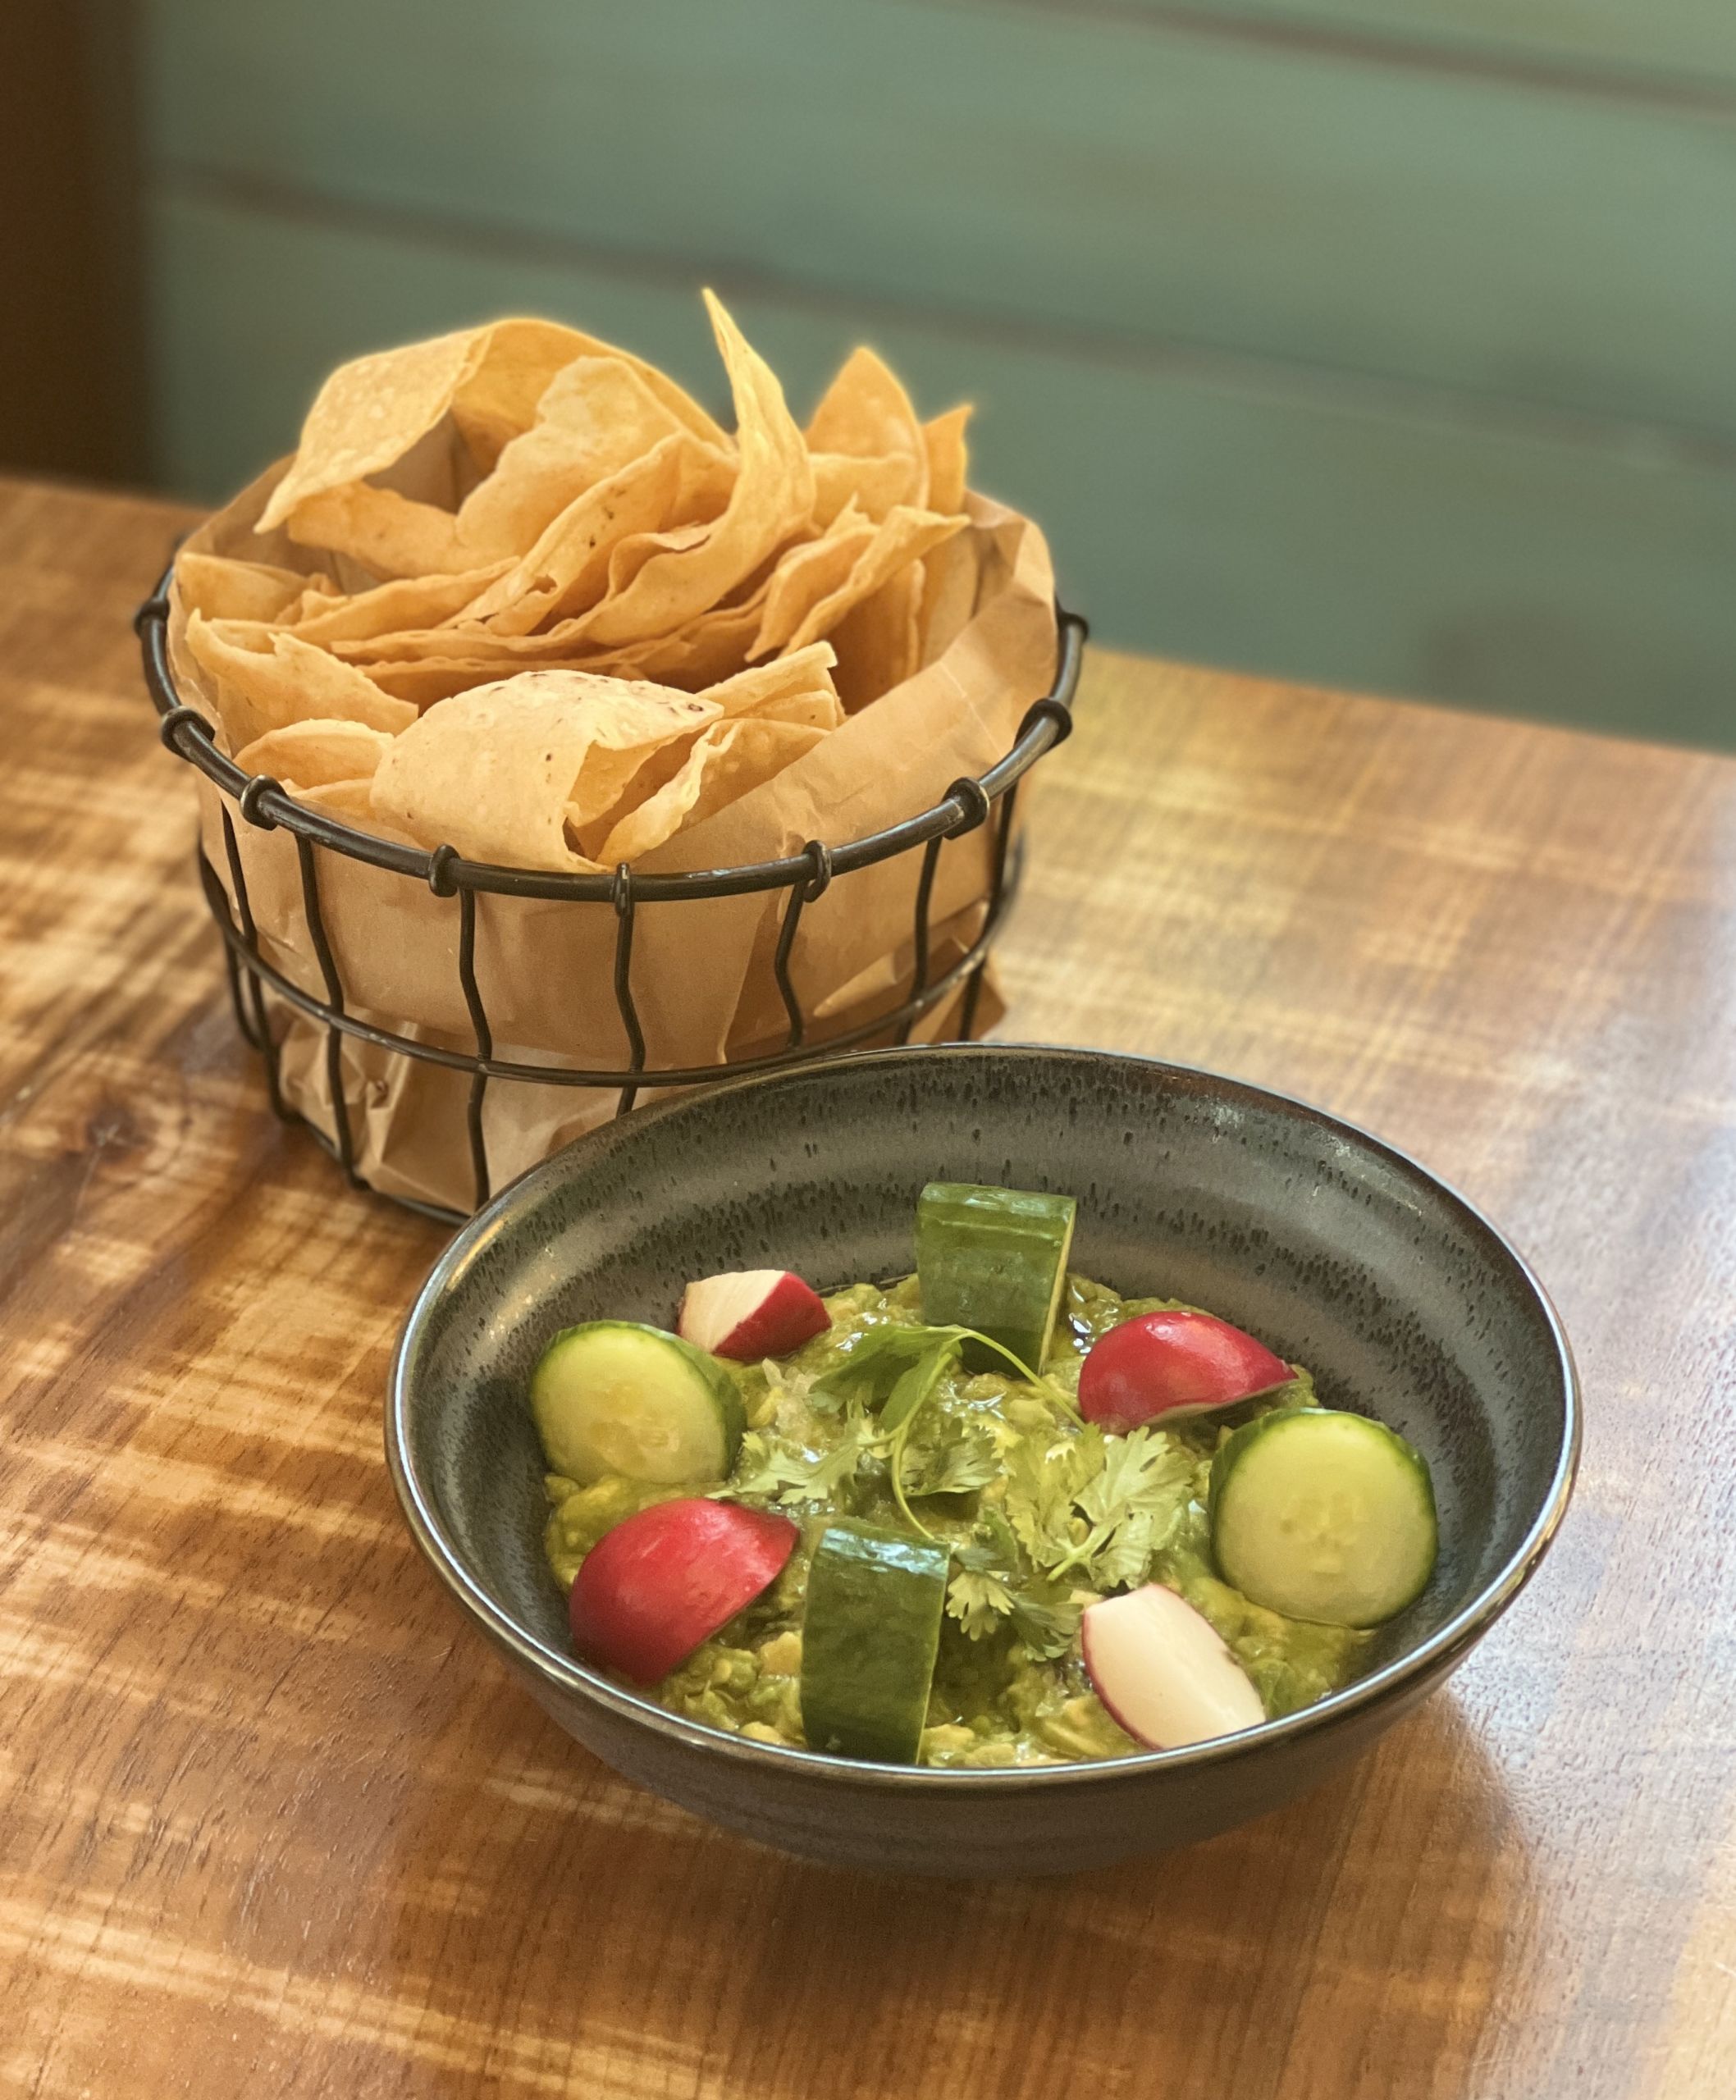 Guacamole and chips from Nada